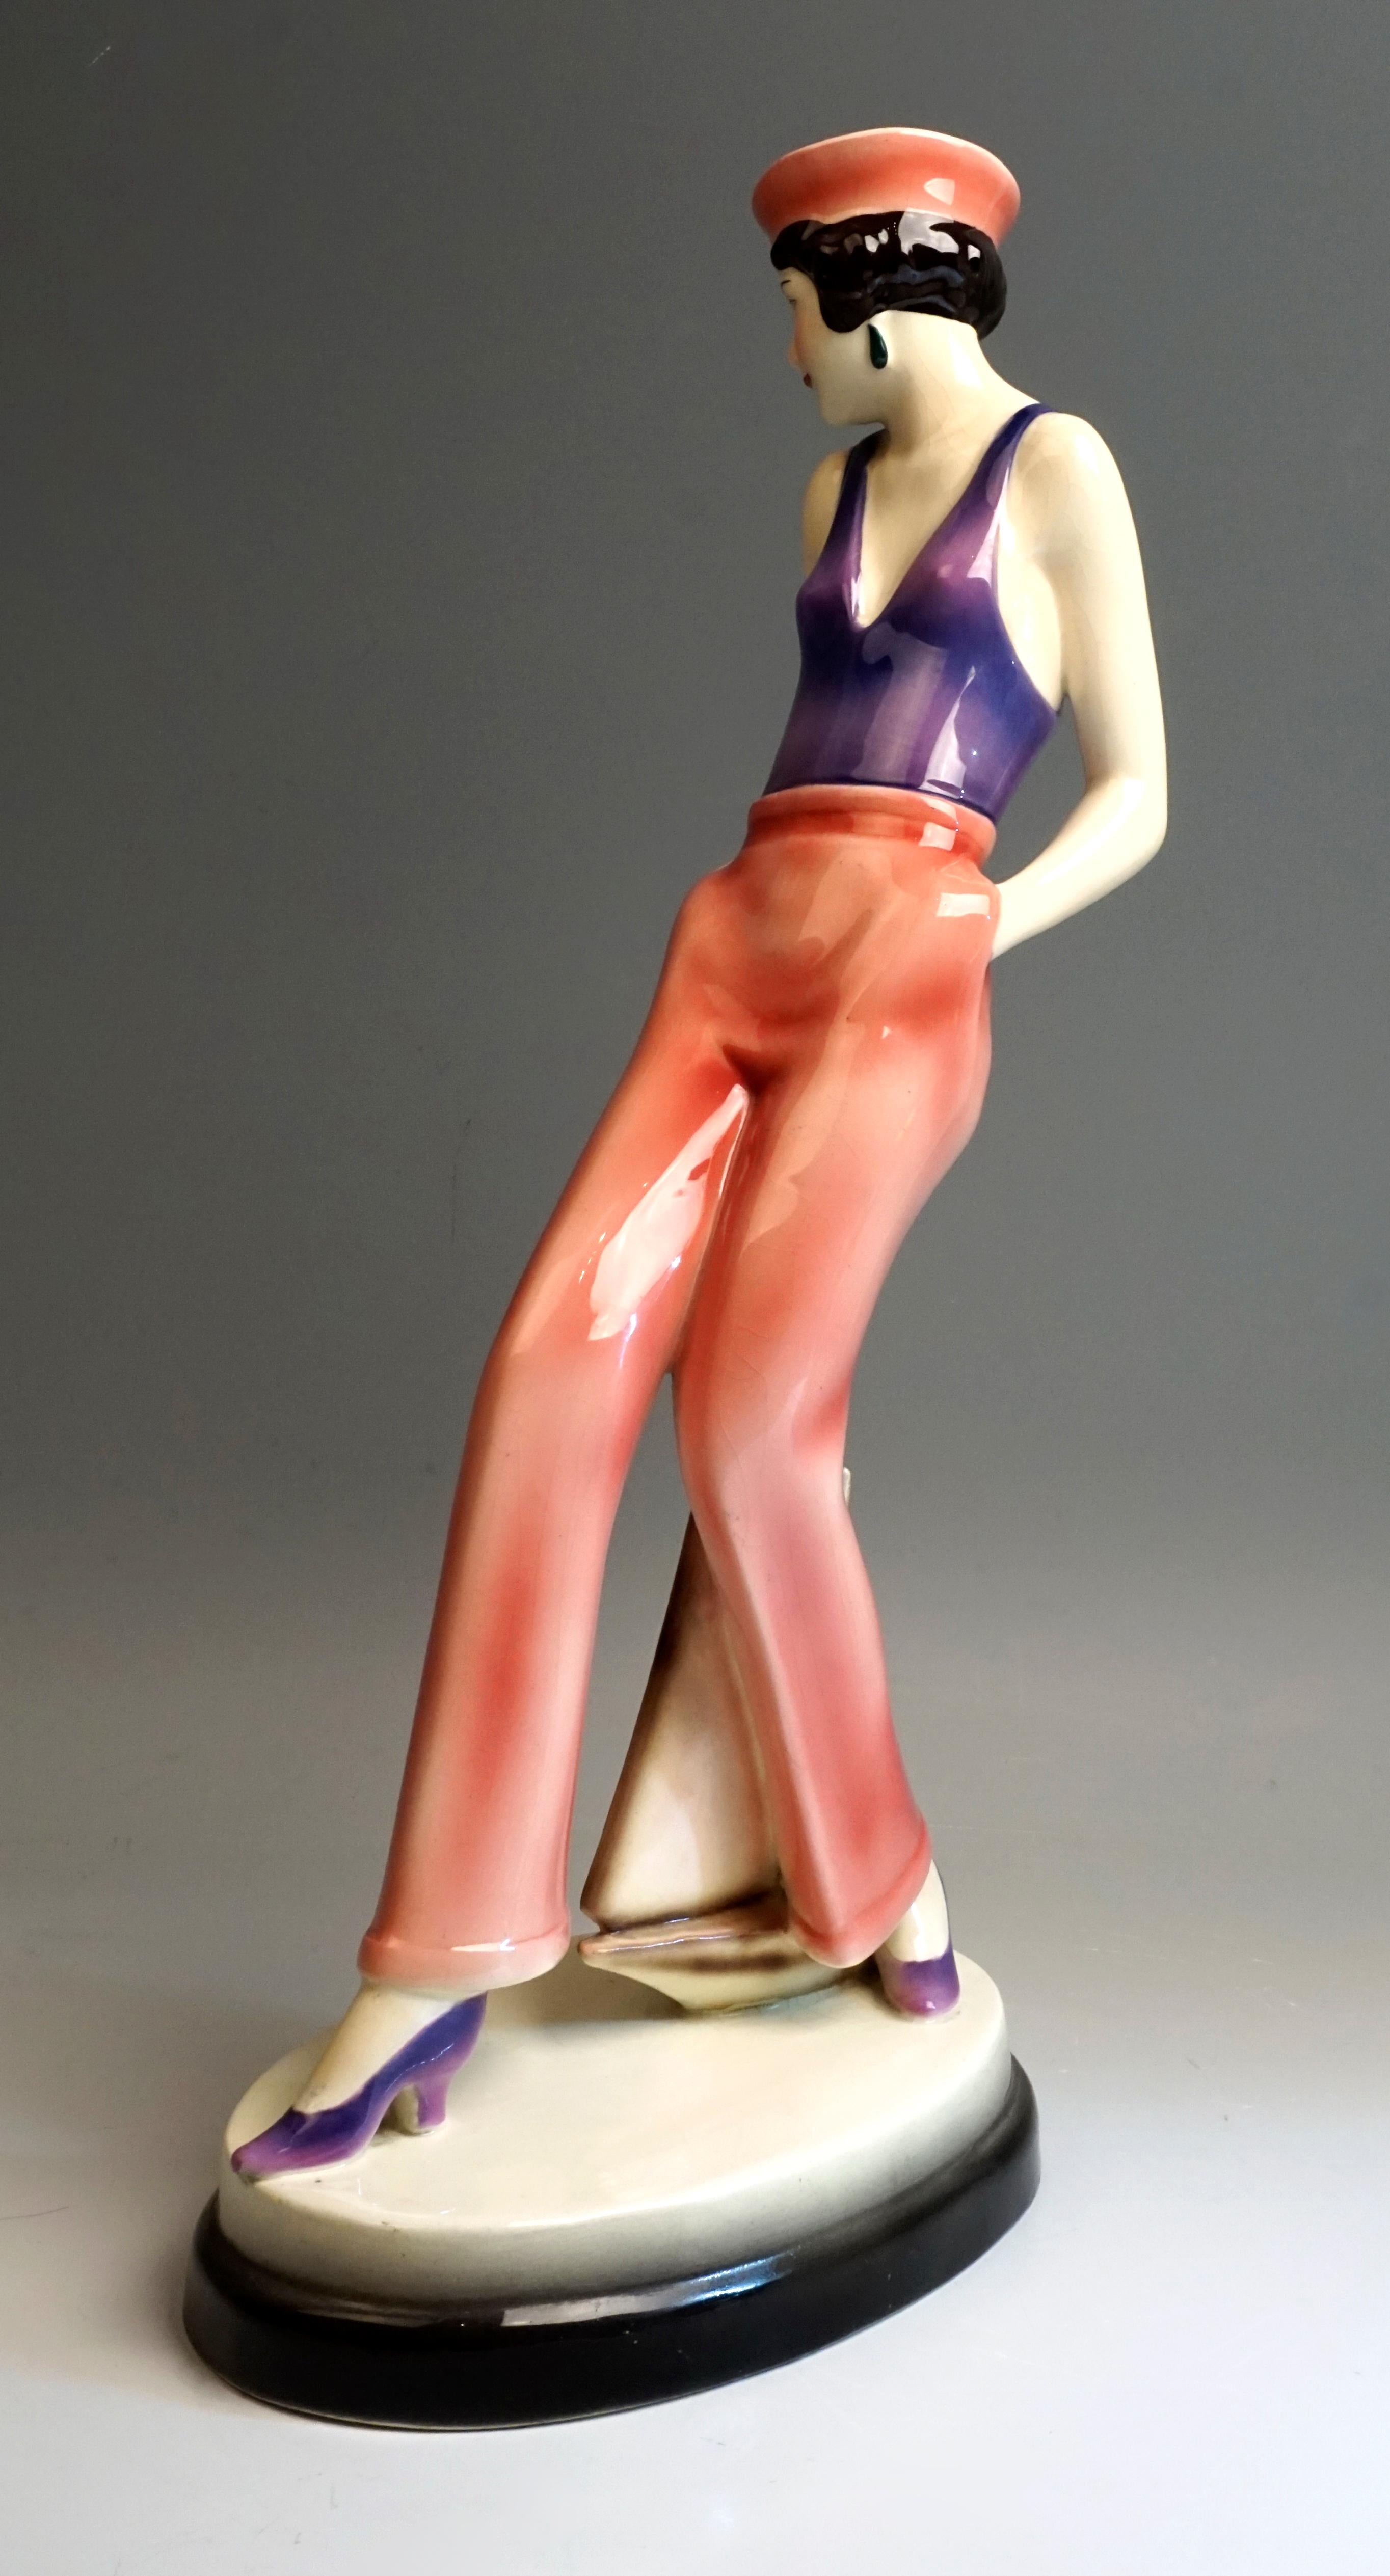 Very rare Art Deco Goldscheider ceramics figurine, circa 1930

The young dancer wears a sleeveless top that is reminiscent of a bathing suit and wide trousers, a sailor hat sits on her short black curly hair. Looking to the right, she takes a step